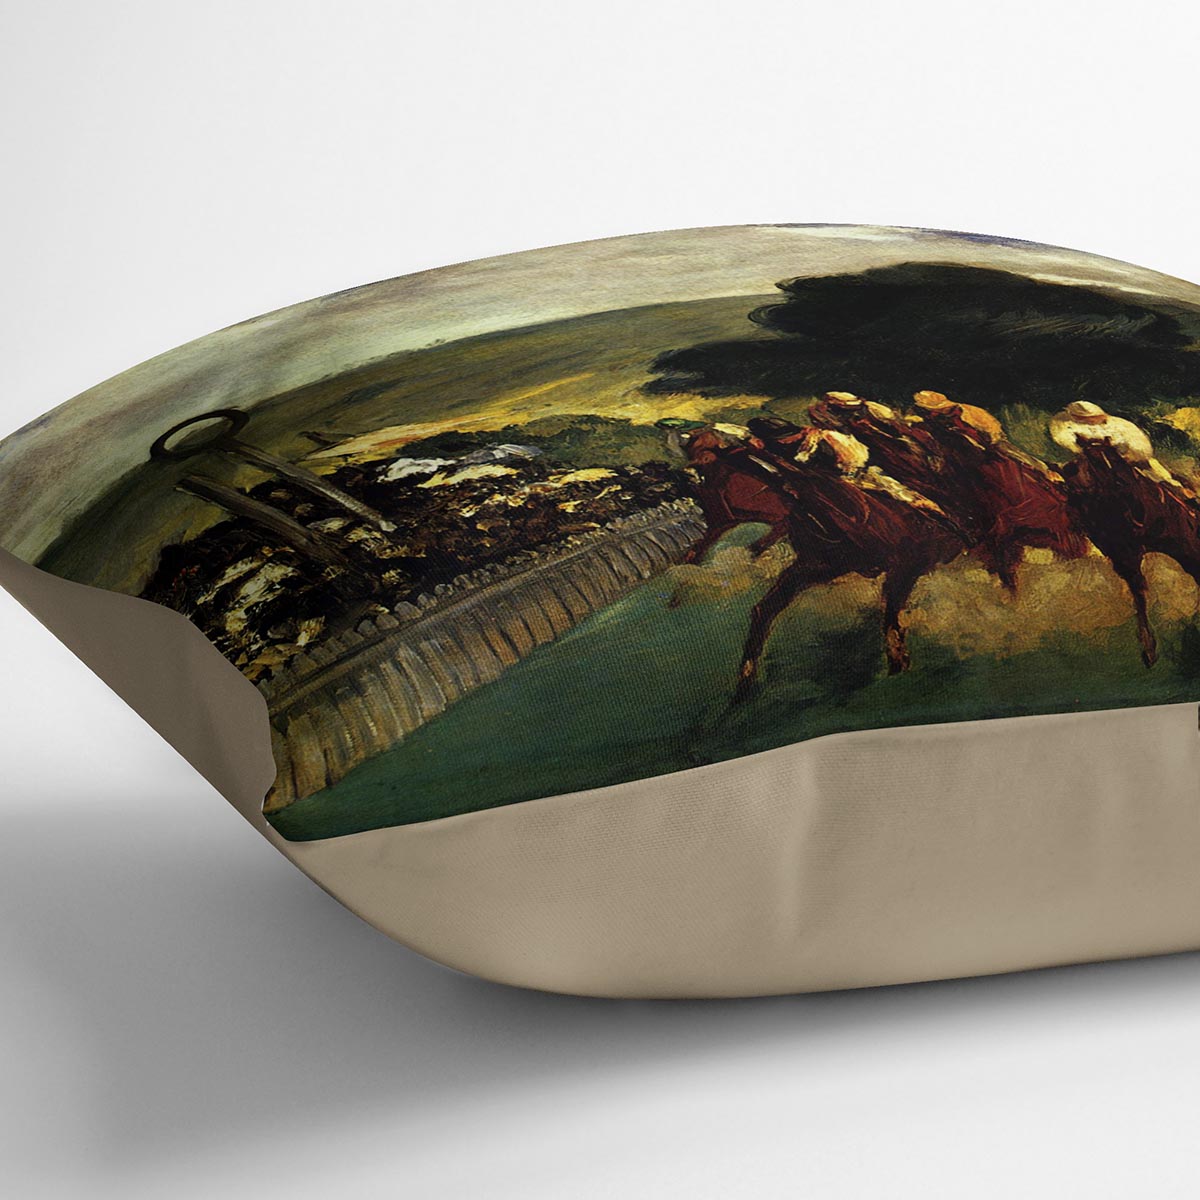 Race at Longchamp by Manet Cushion